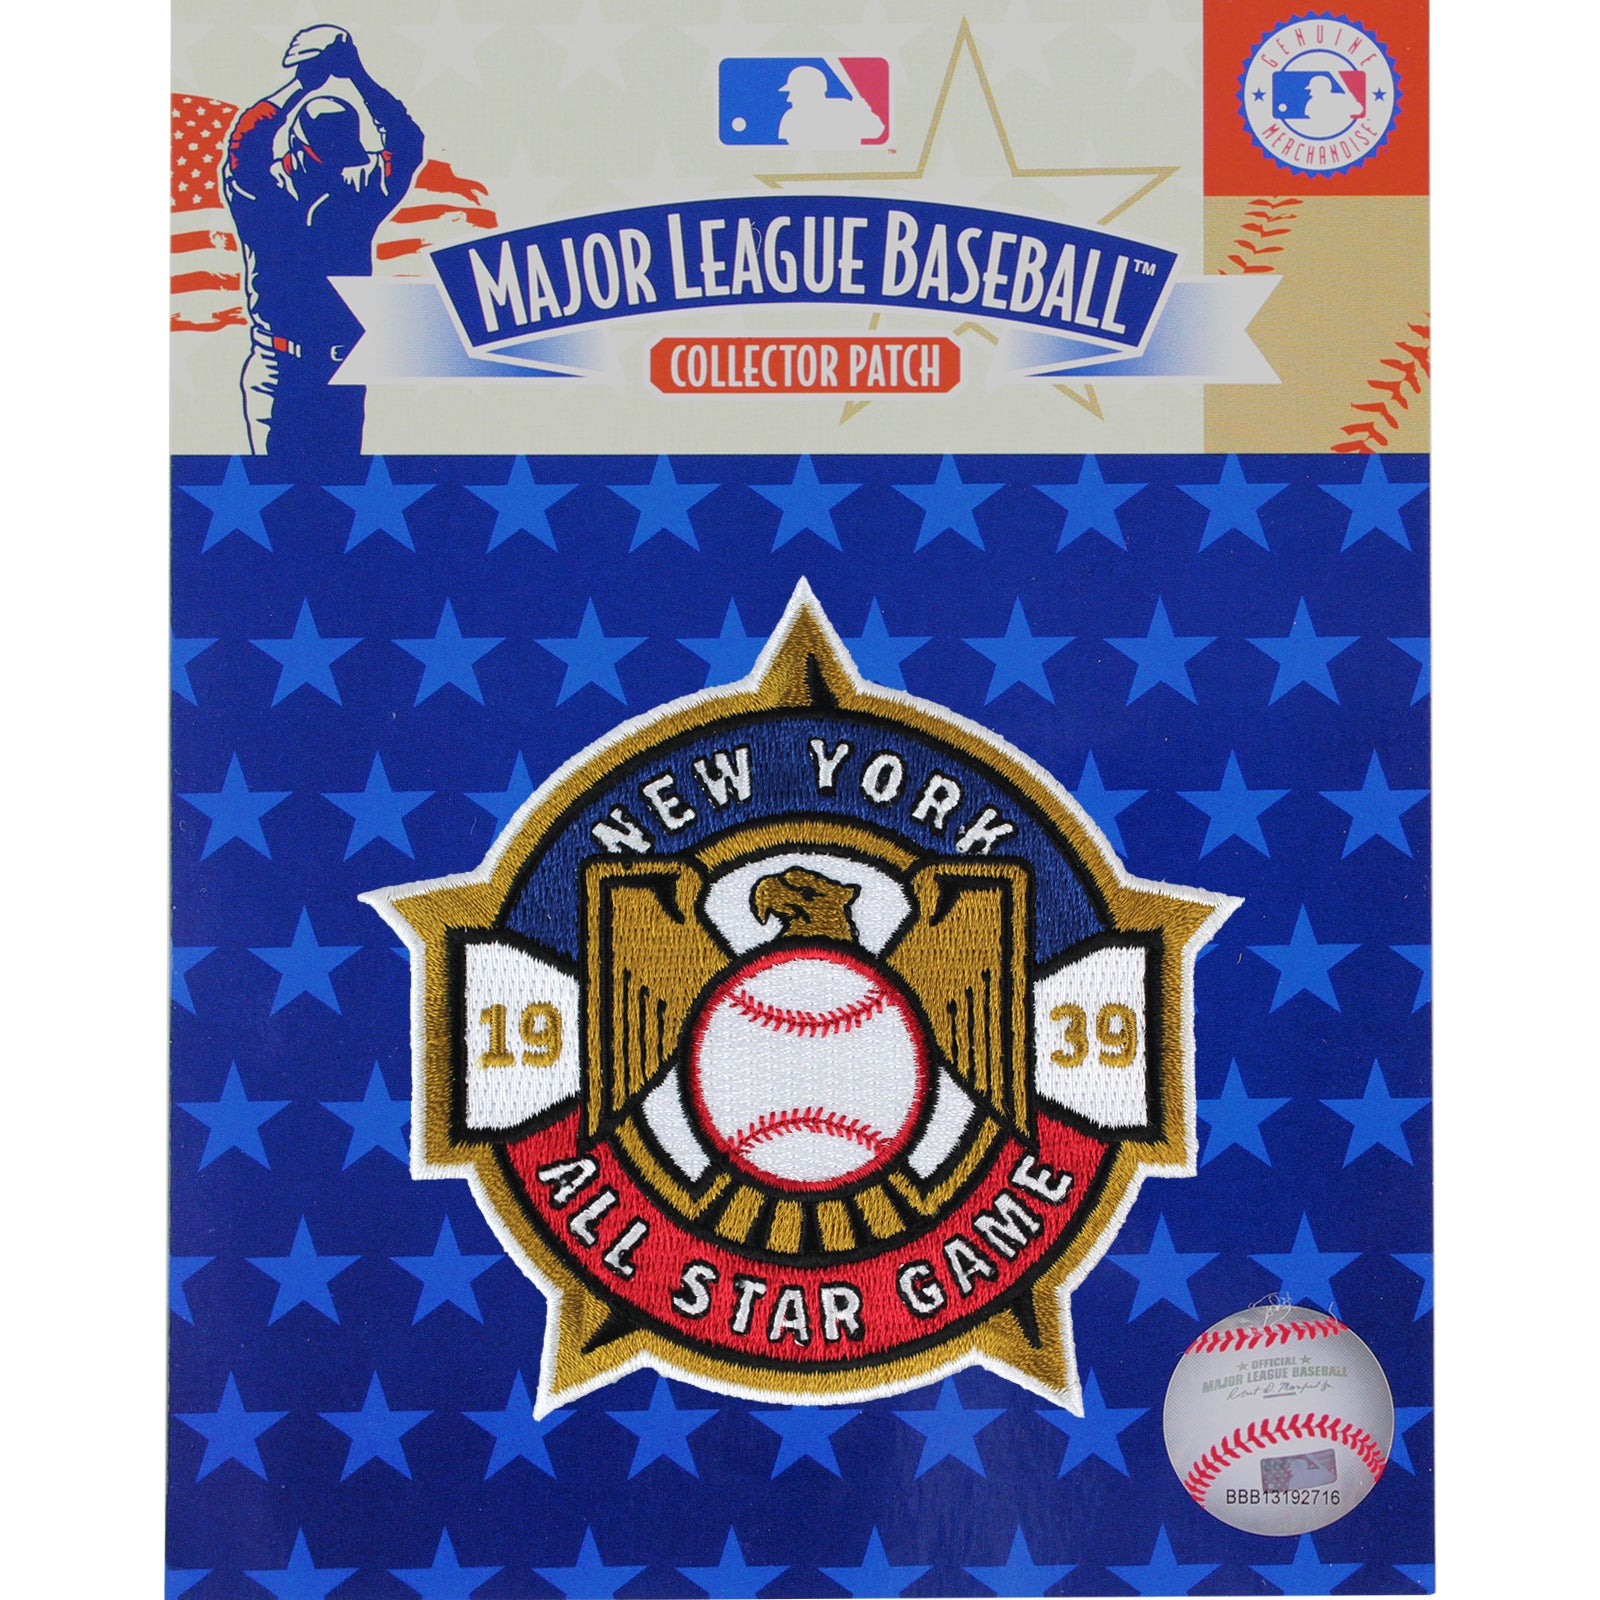 Yankees add Starr Insurance patch to uniform, becoming 13th MLB